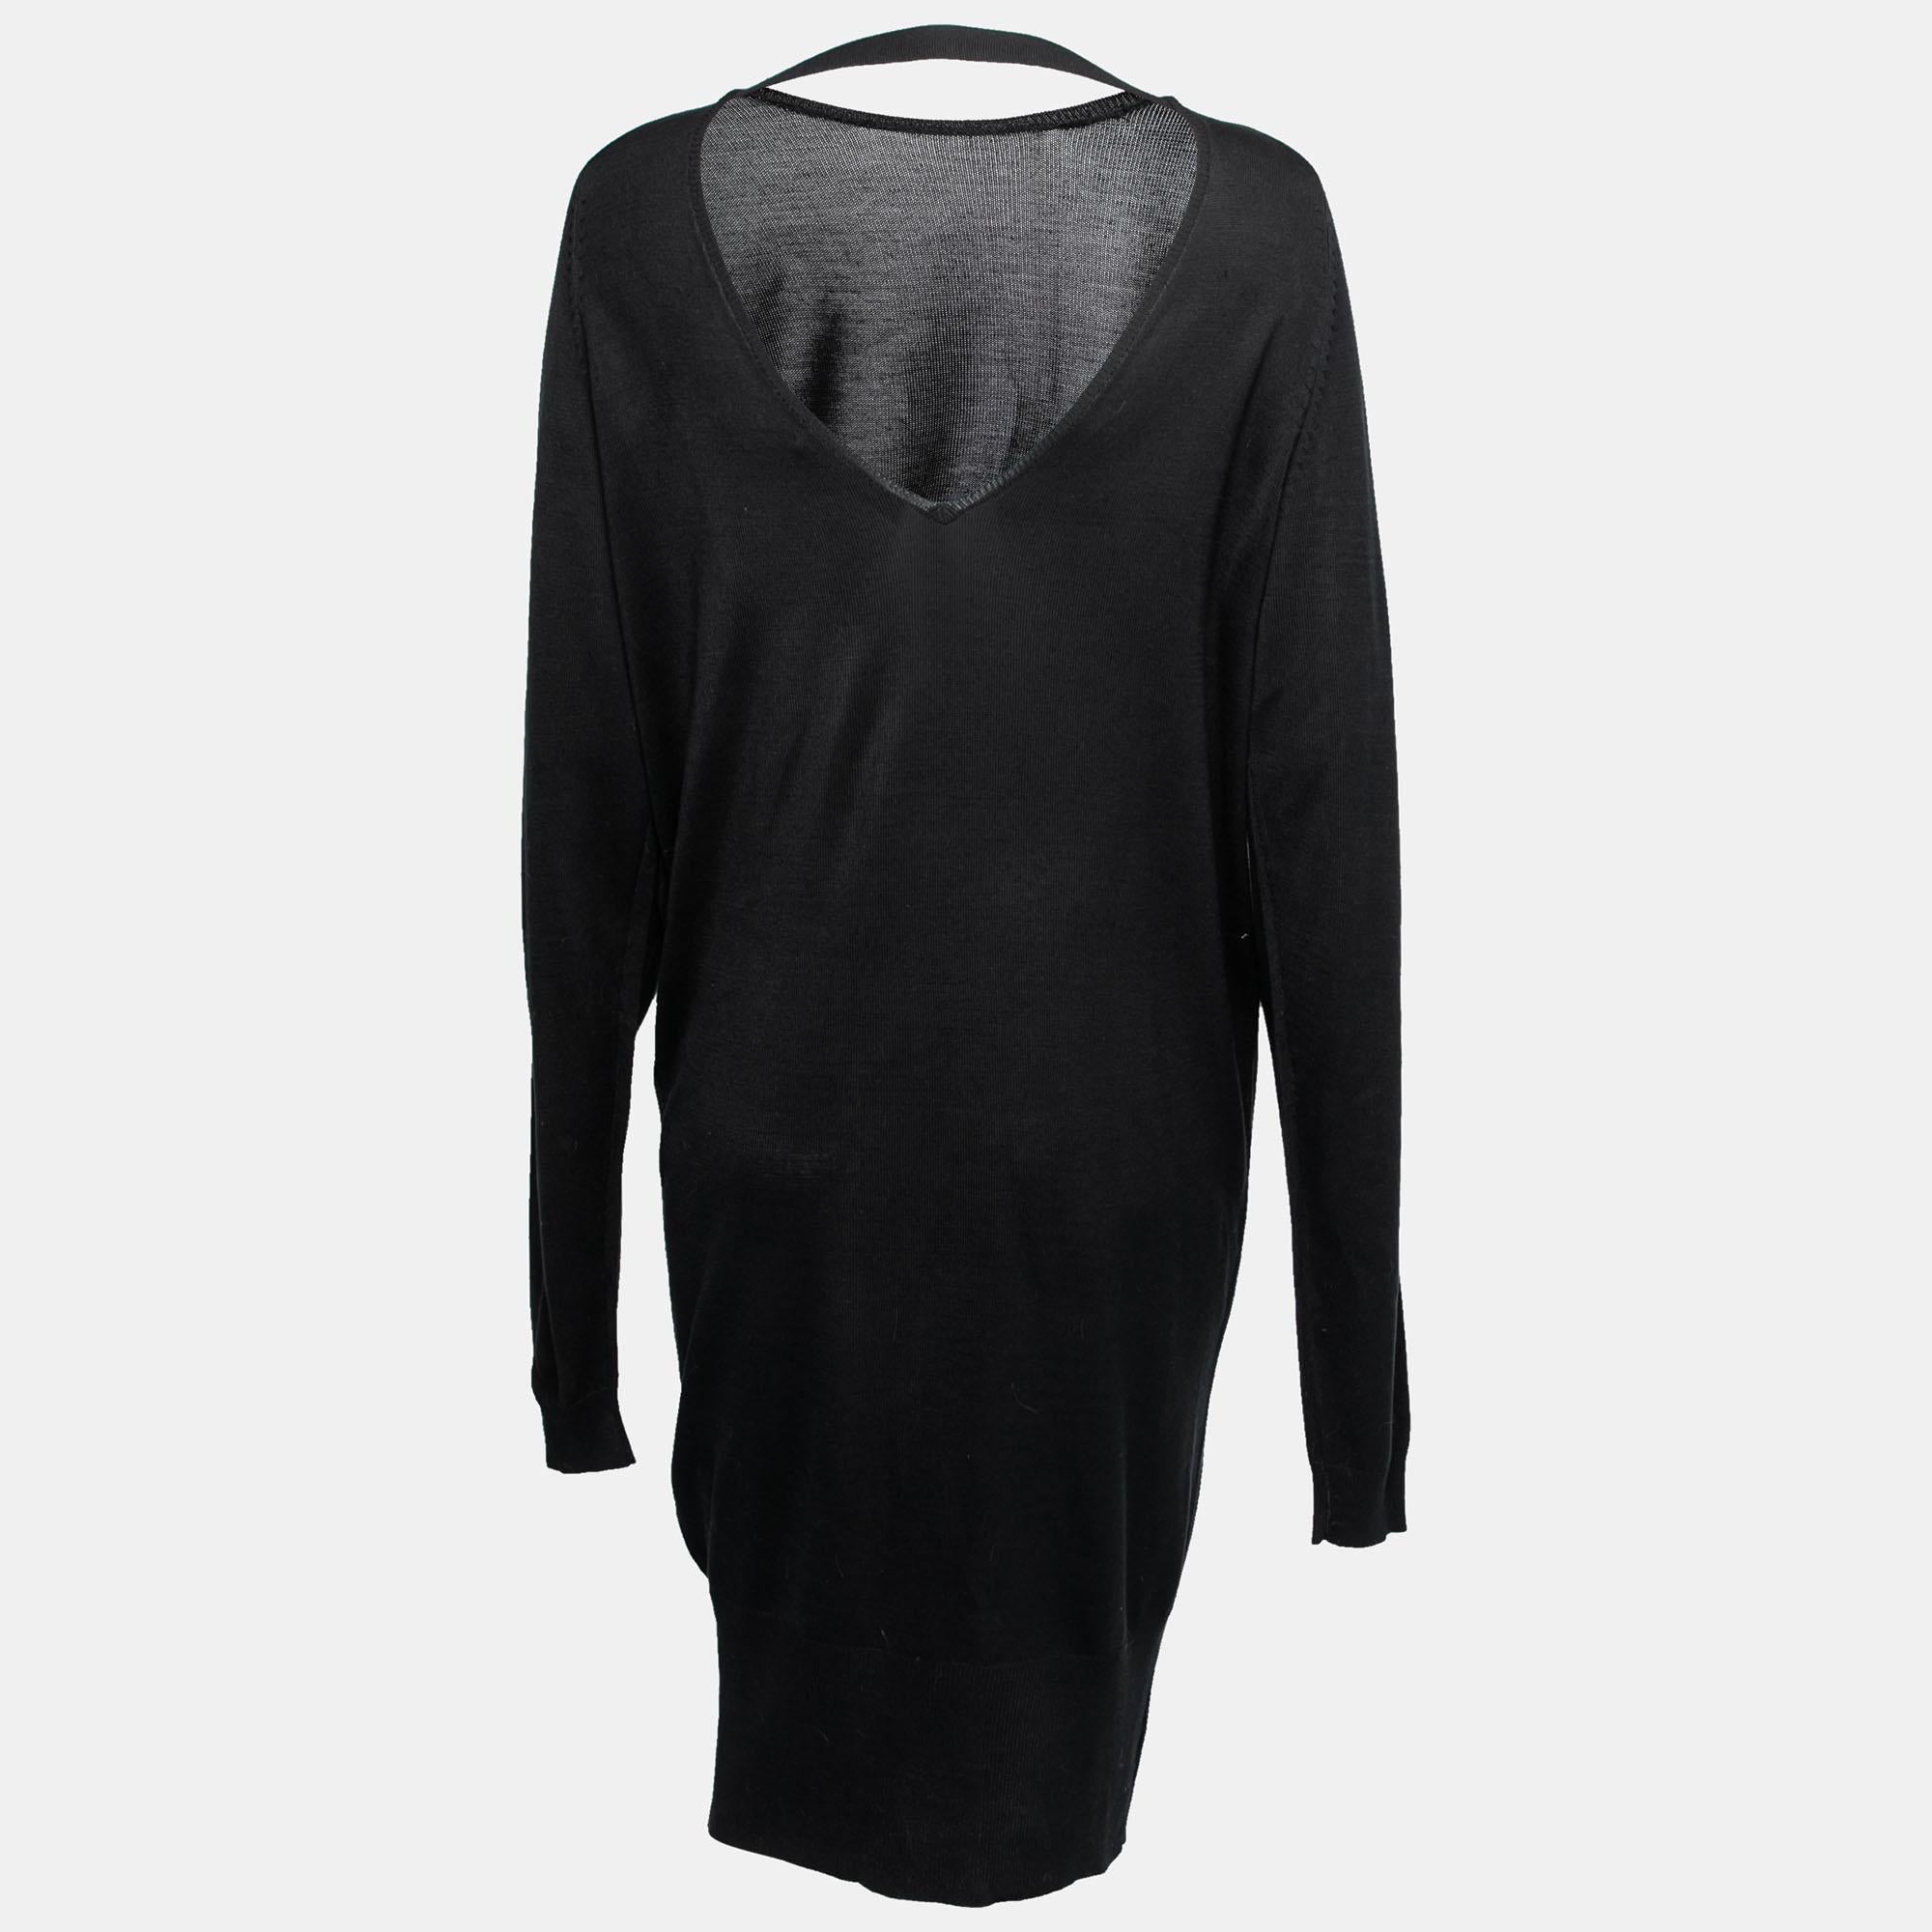 With this dress from the House of Balenciaga, comfort and elegance come easy! It is fashioned in black silk knit fabric and flaunts a low-cut backline, long sleeves, and embellishments on the shoulder. Match this Balenciaga dress with matching heels